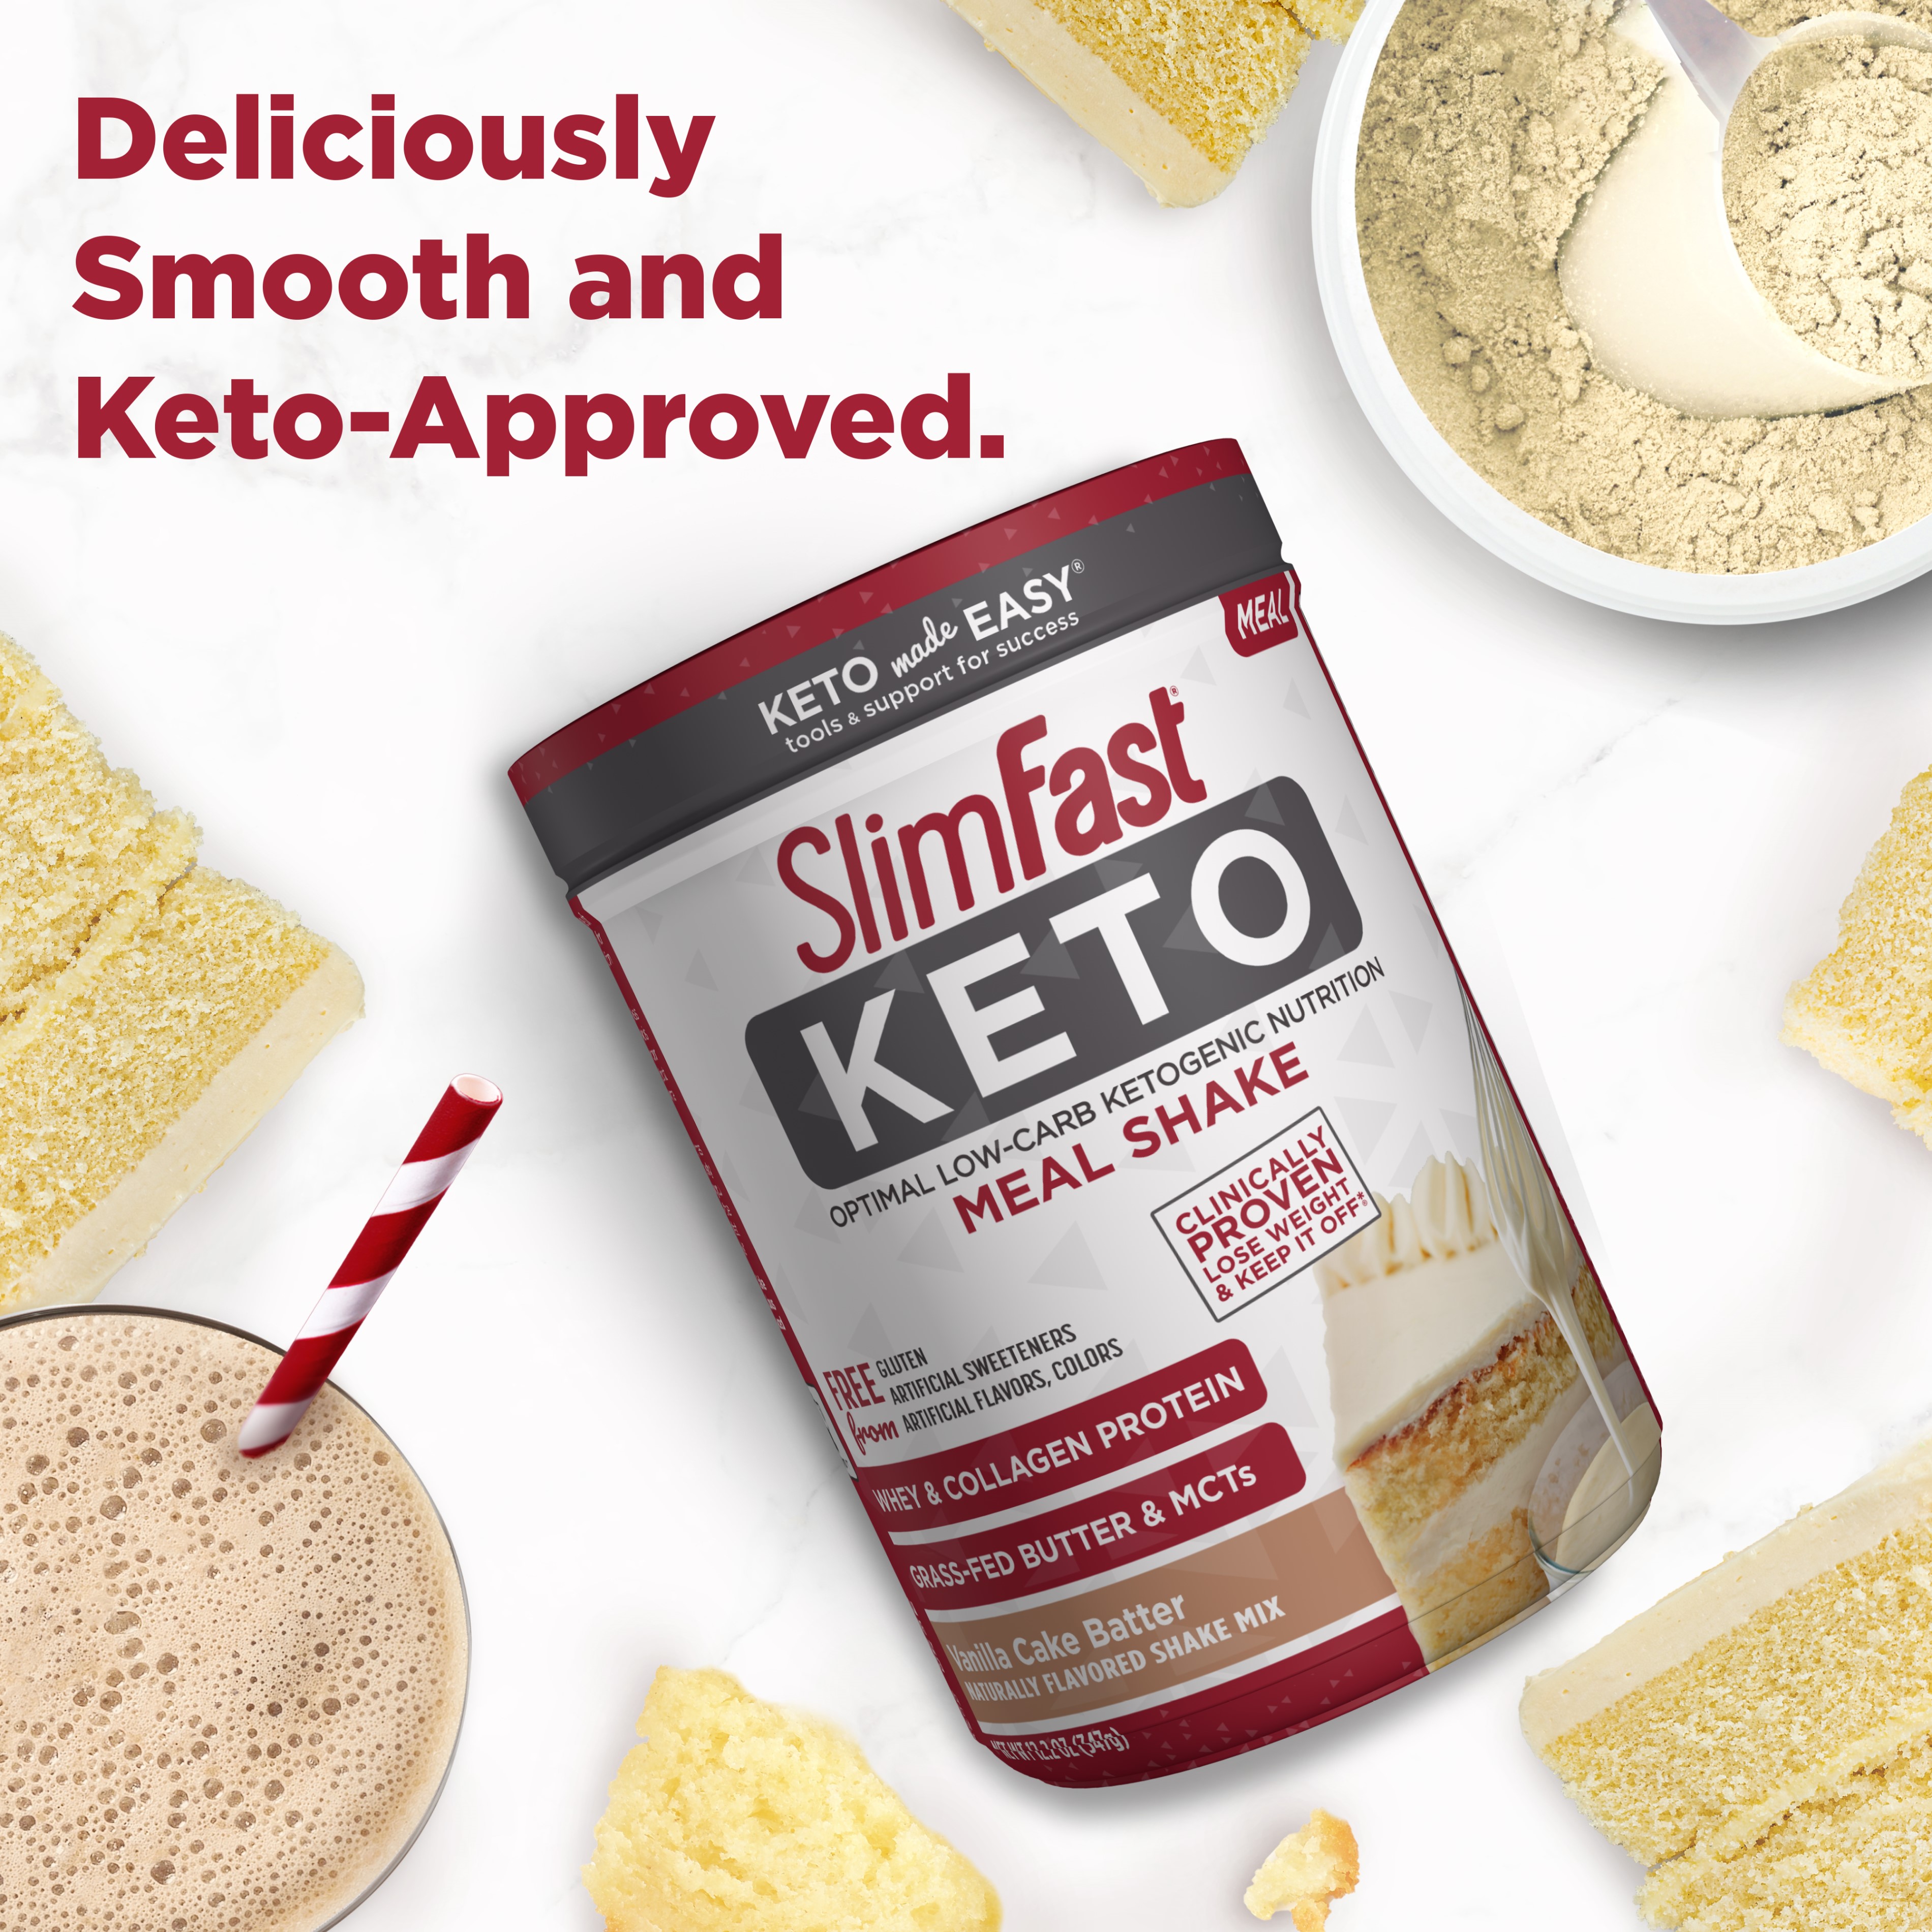 SlimFast Keto Meal Replacement Shake Powder, Vanilla Cake Batter, 12.2 Oz. Canister (10 servings) - image 5 of 8